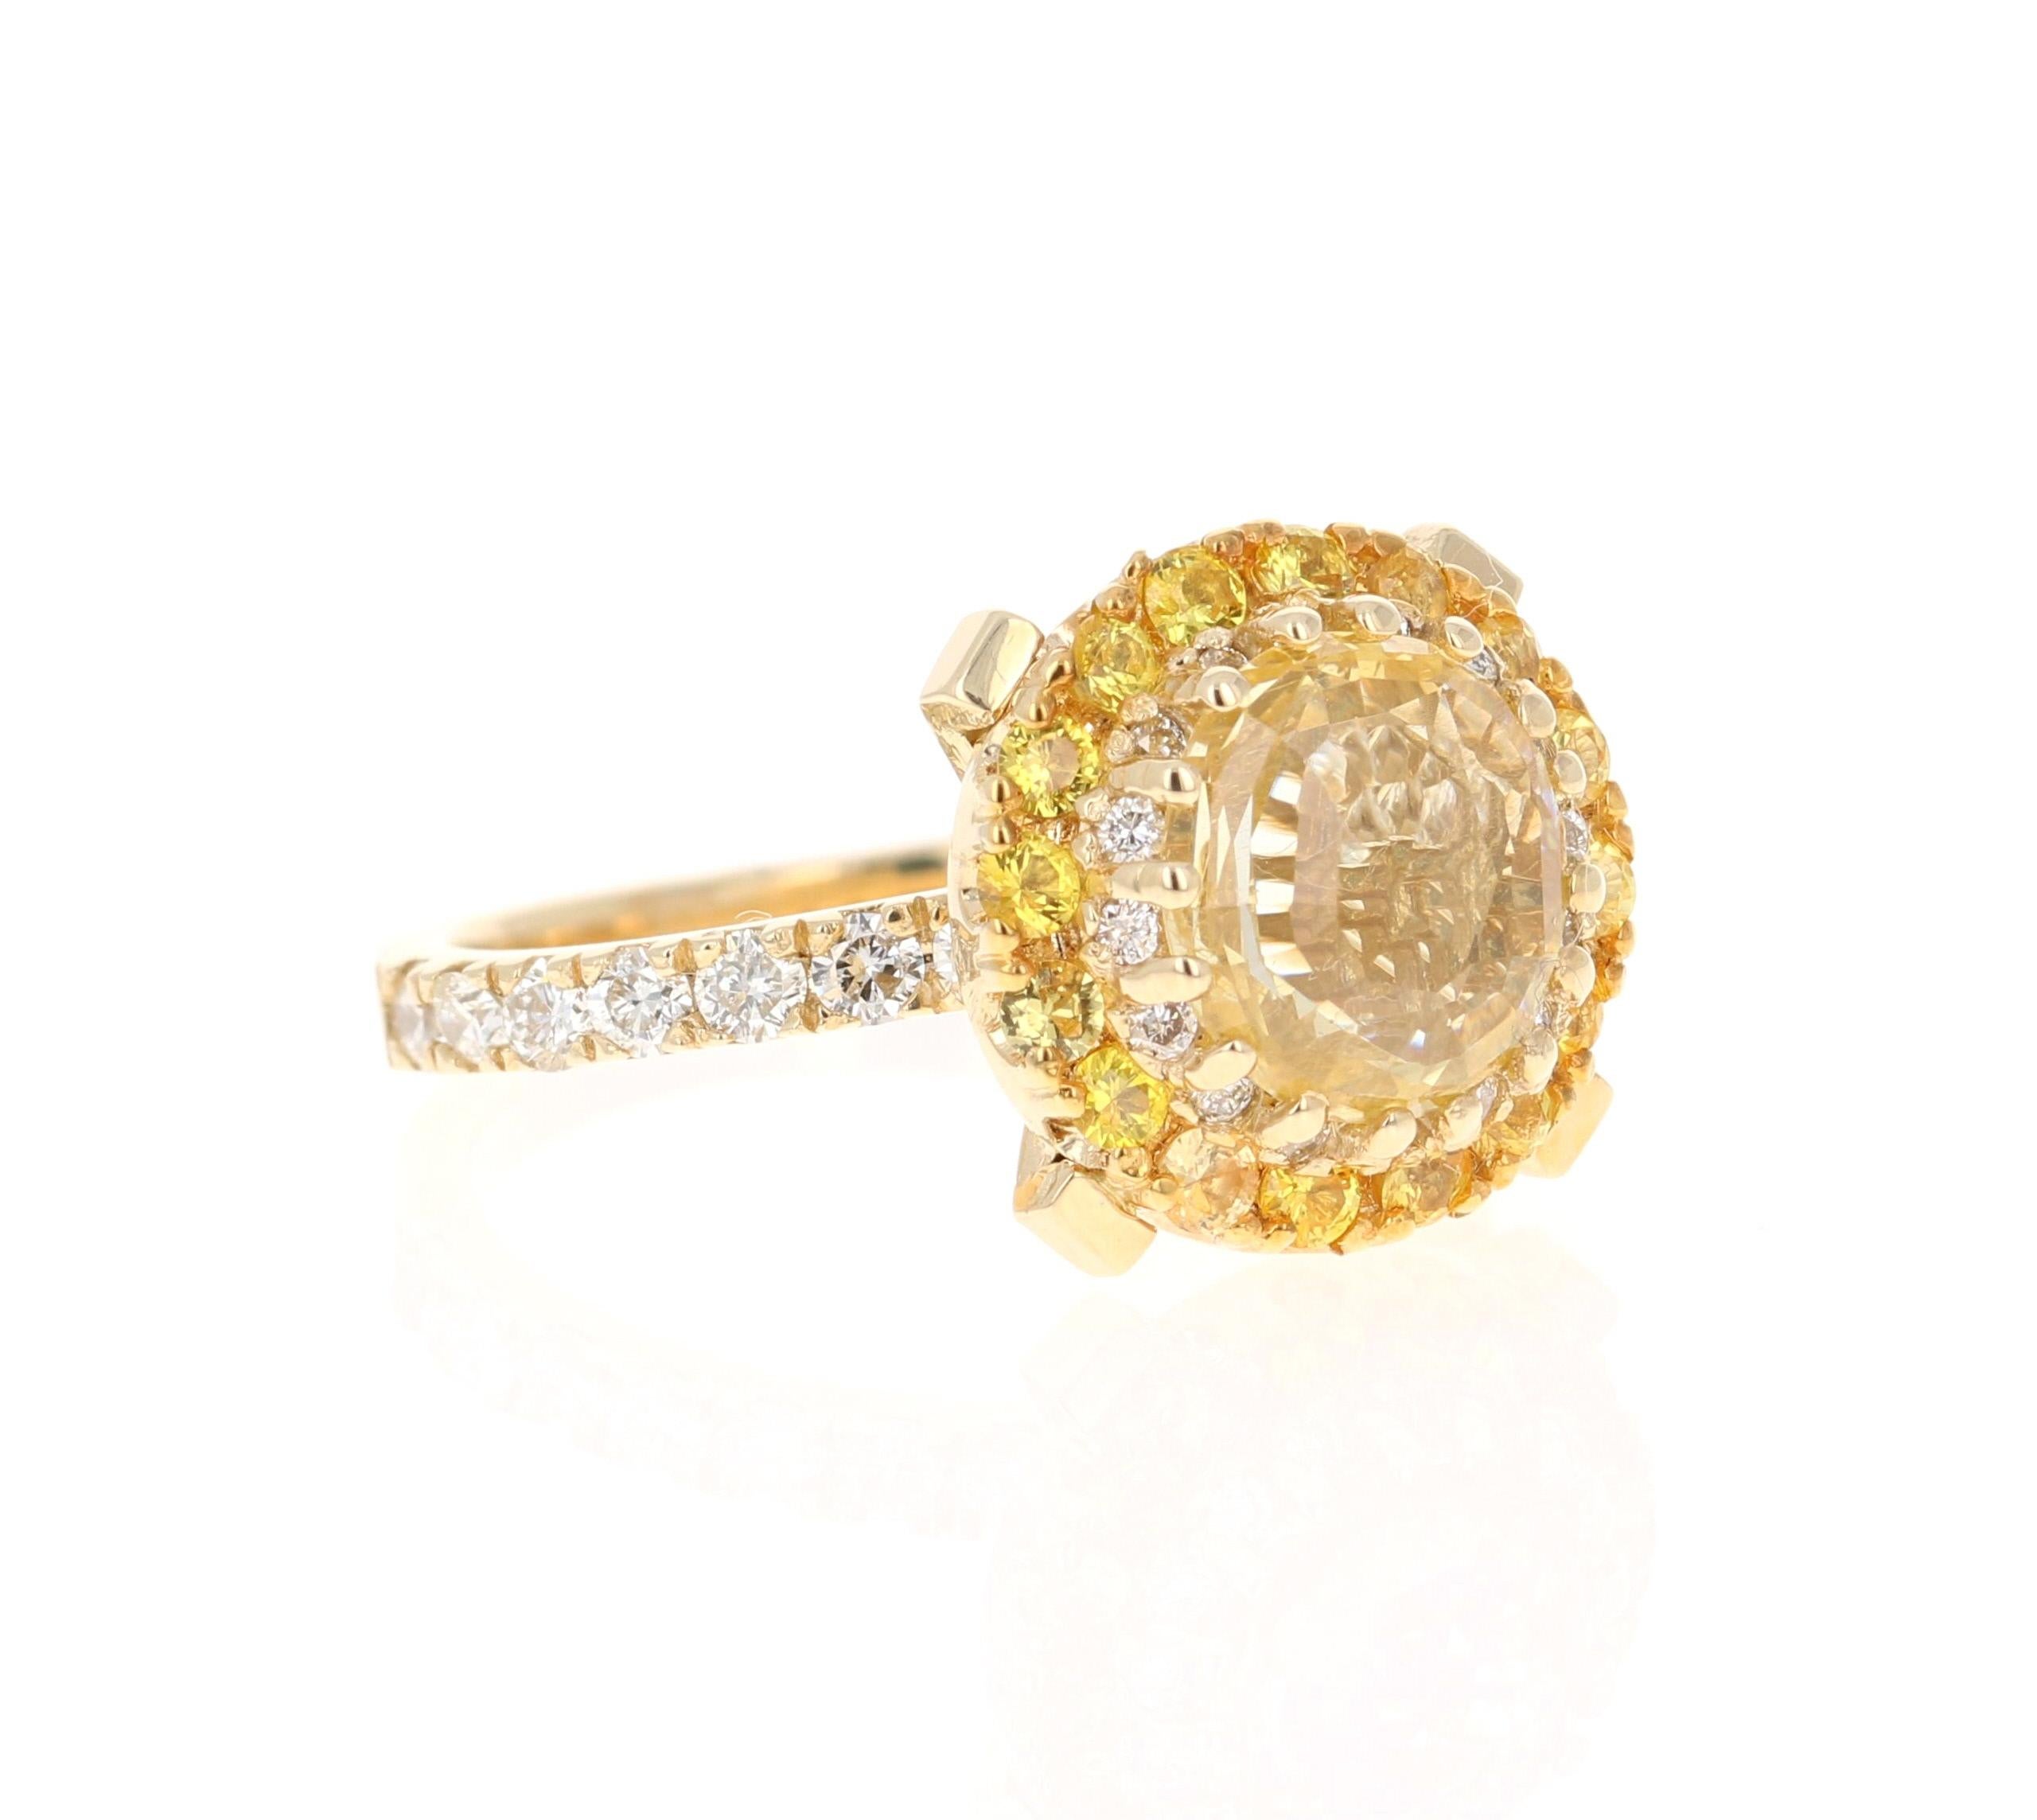 This ring has a Round Oval Cut Yellow Sapphire that is GIA Certified. The Yellow Sapphire is natural and is a NON-HEATED stone. The measurements are approximately 9 mm x 8 mm.

It is surrounded by a halo of 16 Round Cut Yellow Sapphires that weigh